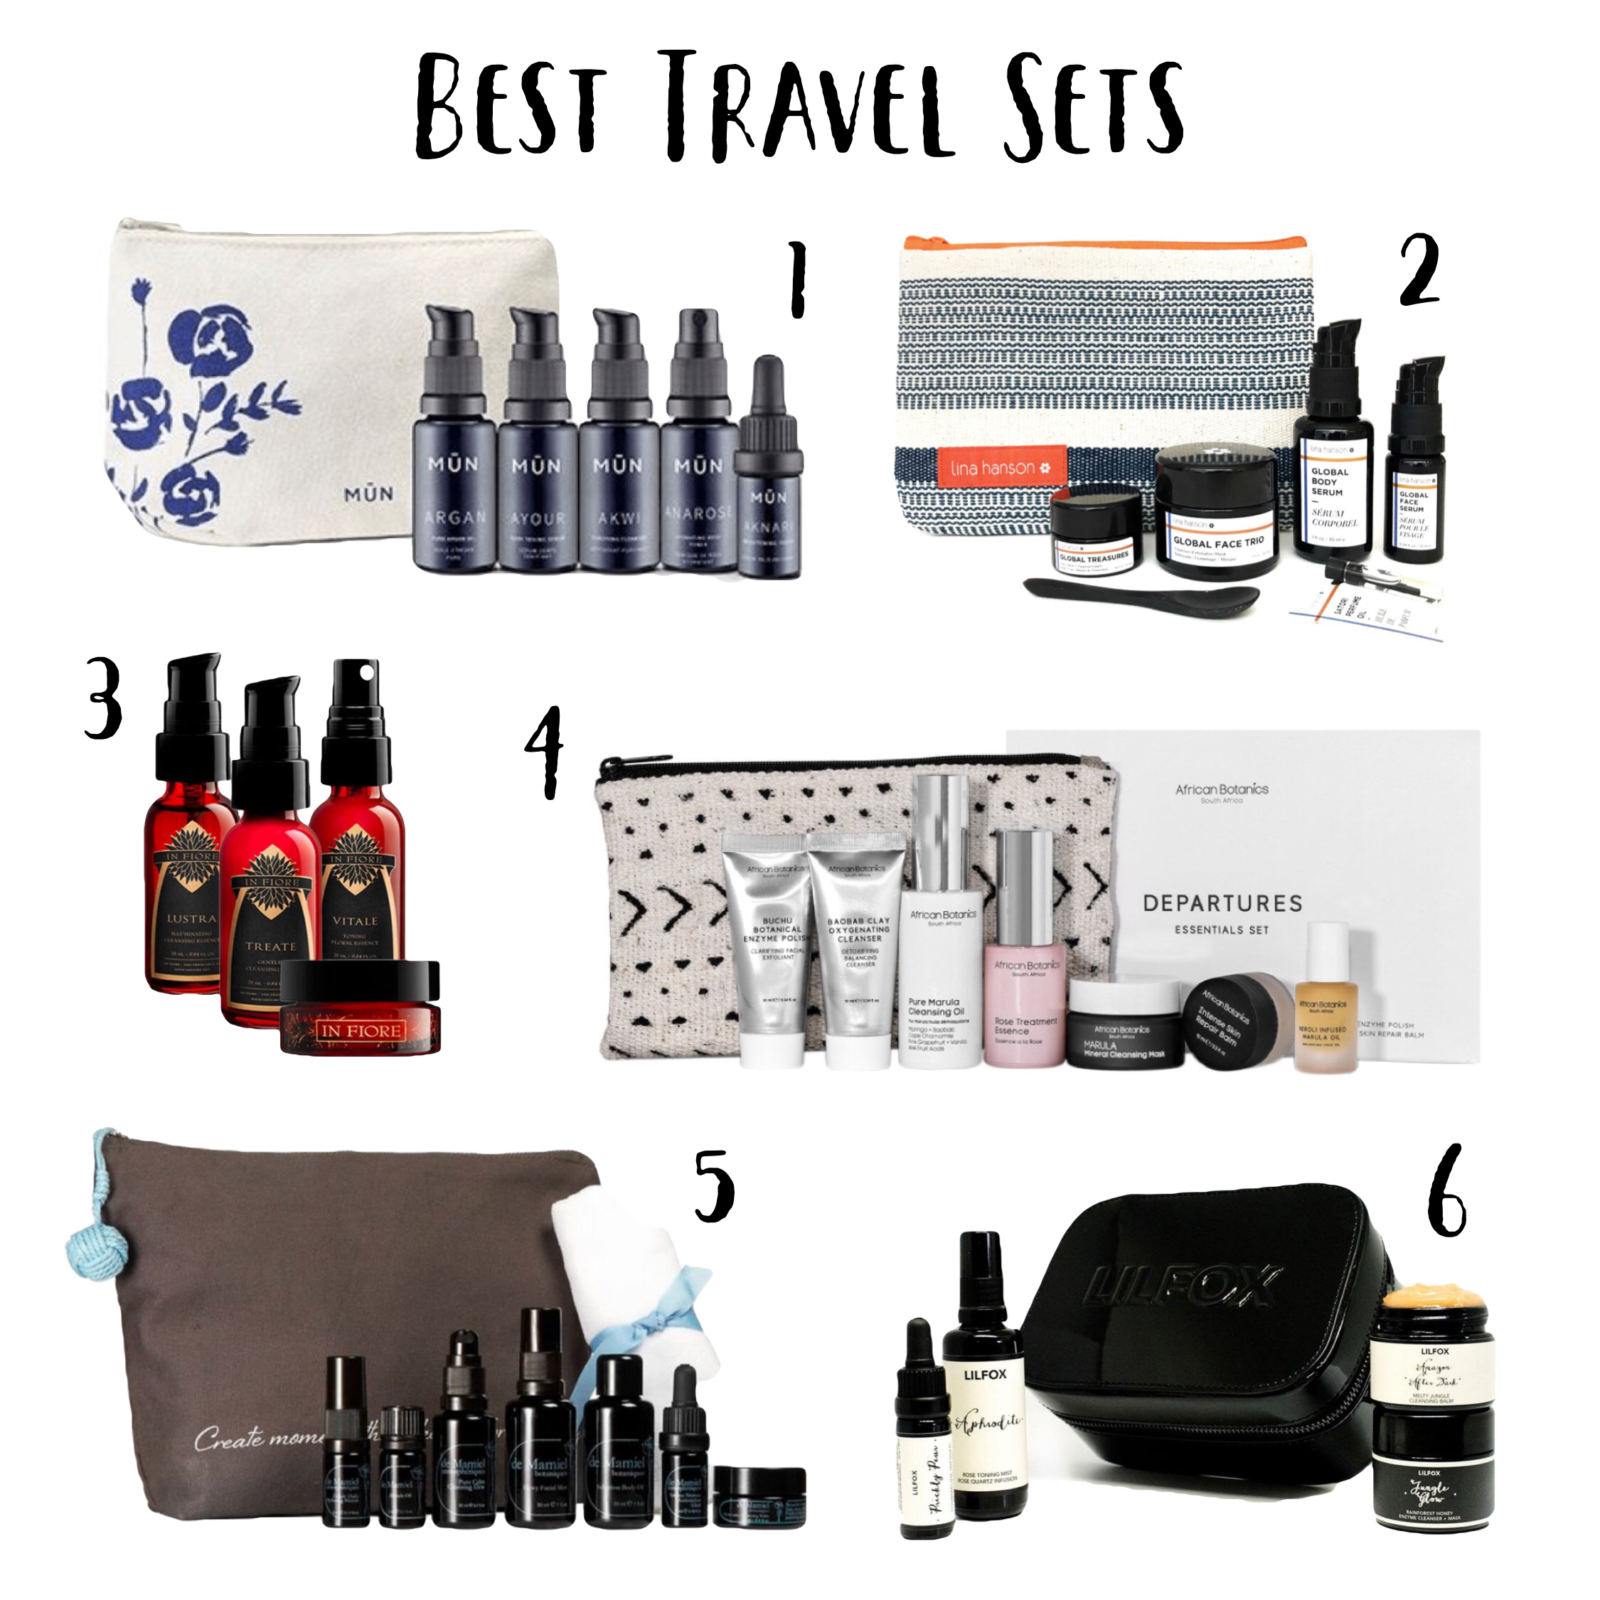 Product Roundup: The Best Travel Sets